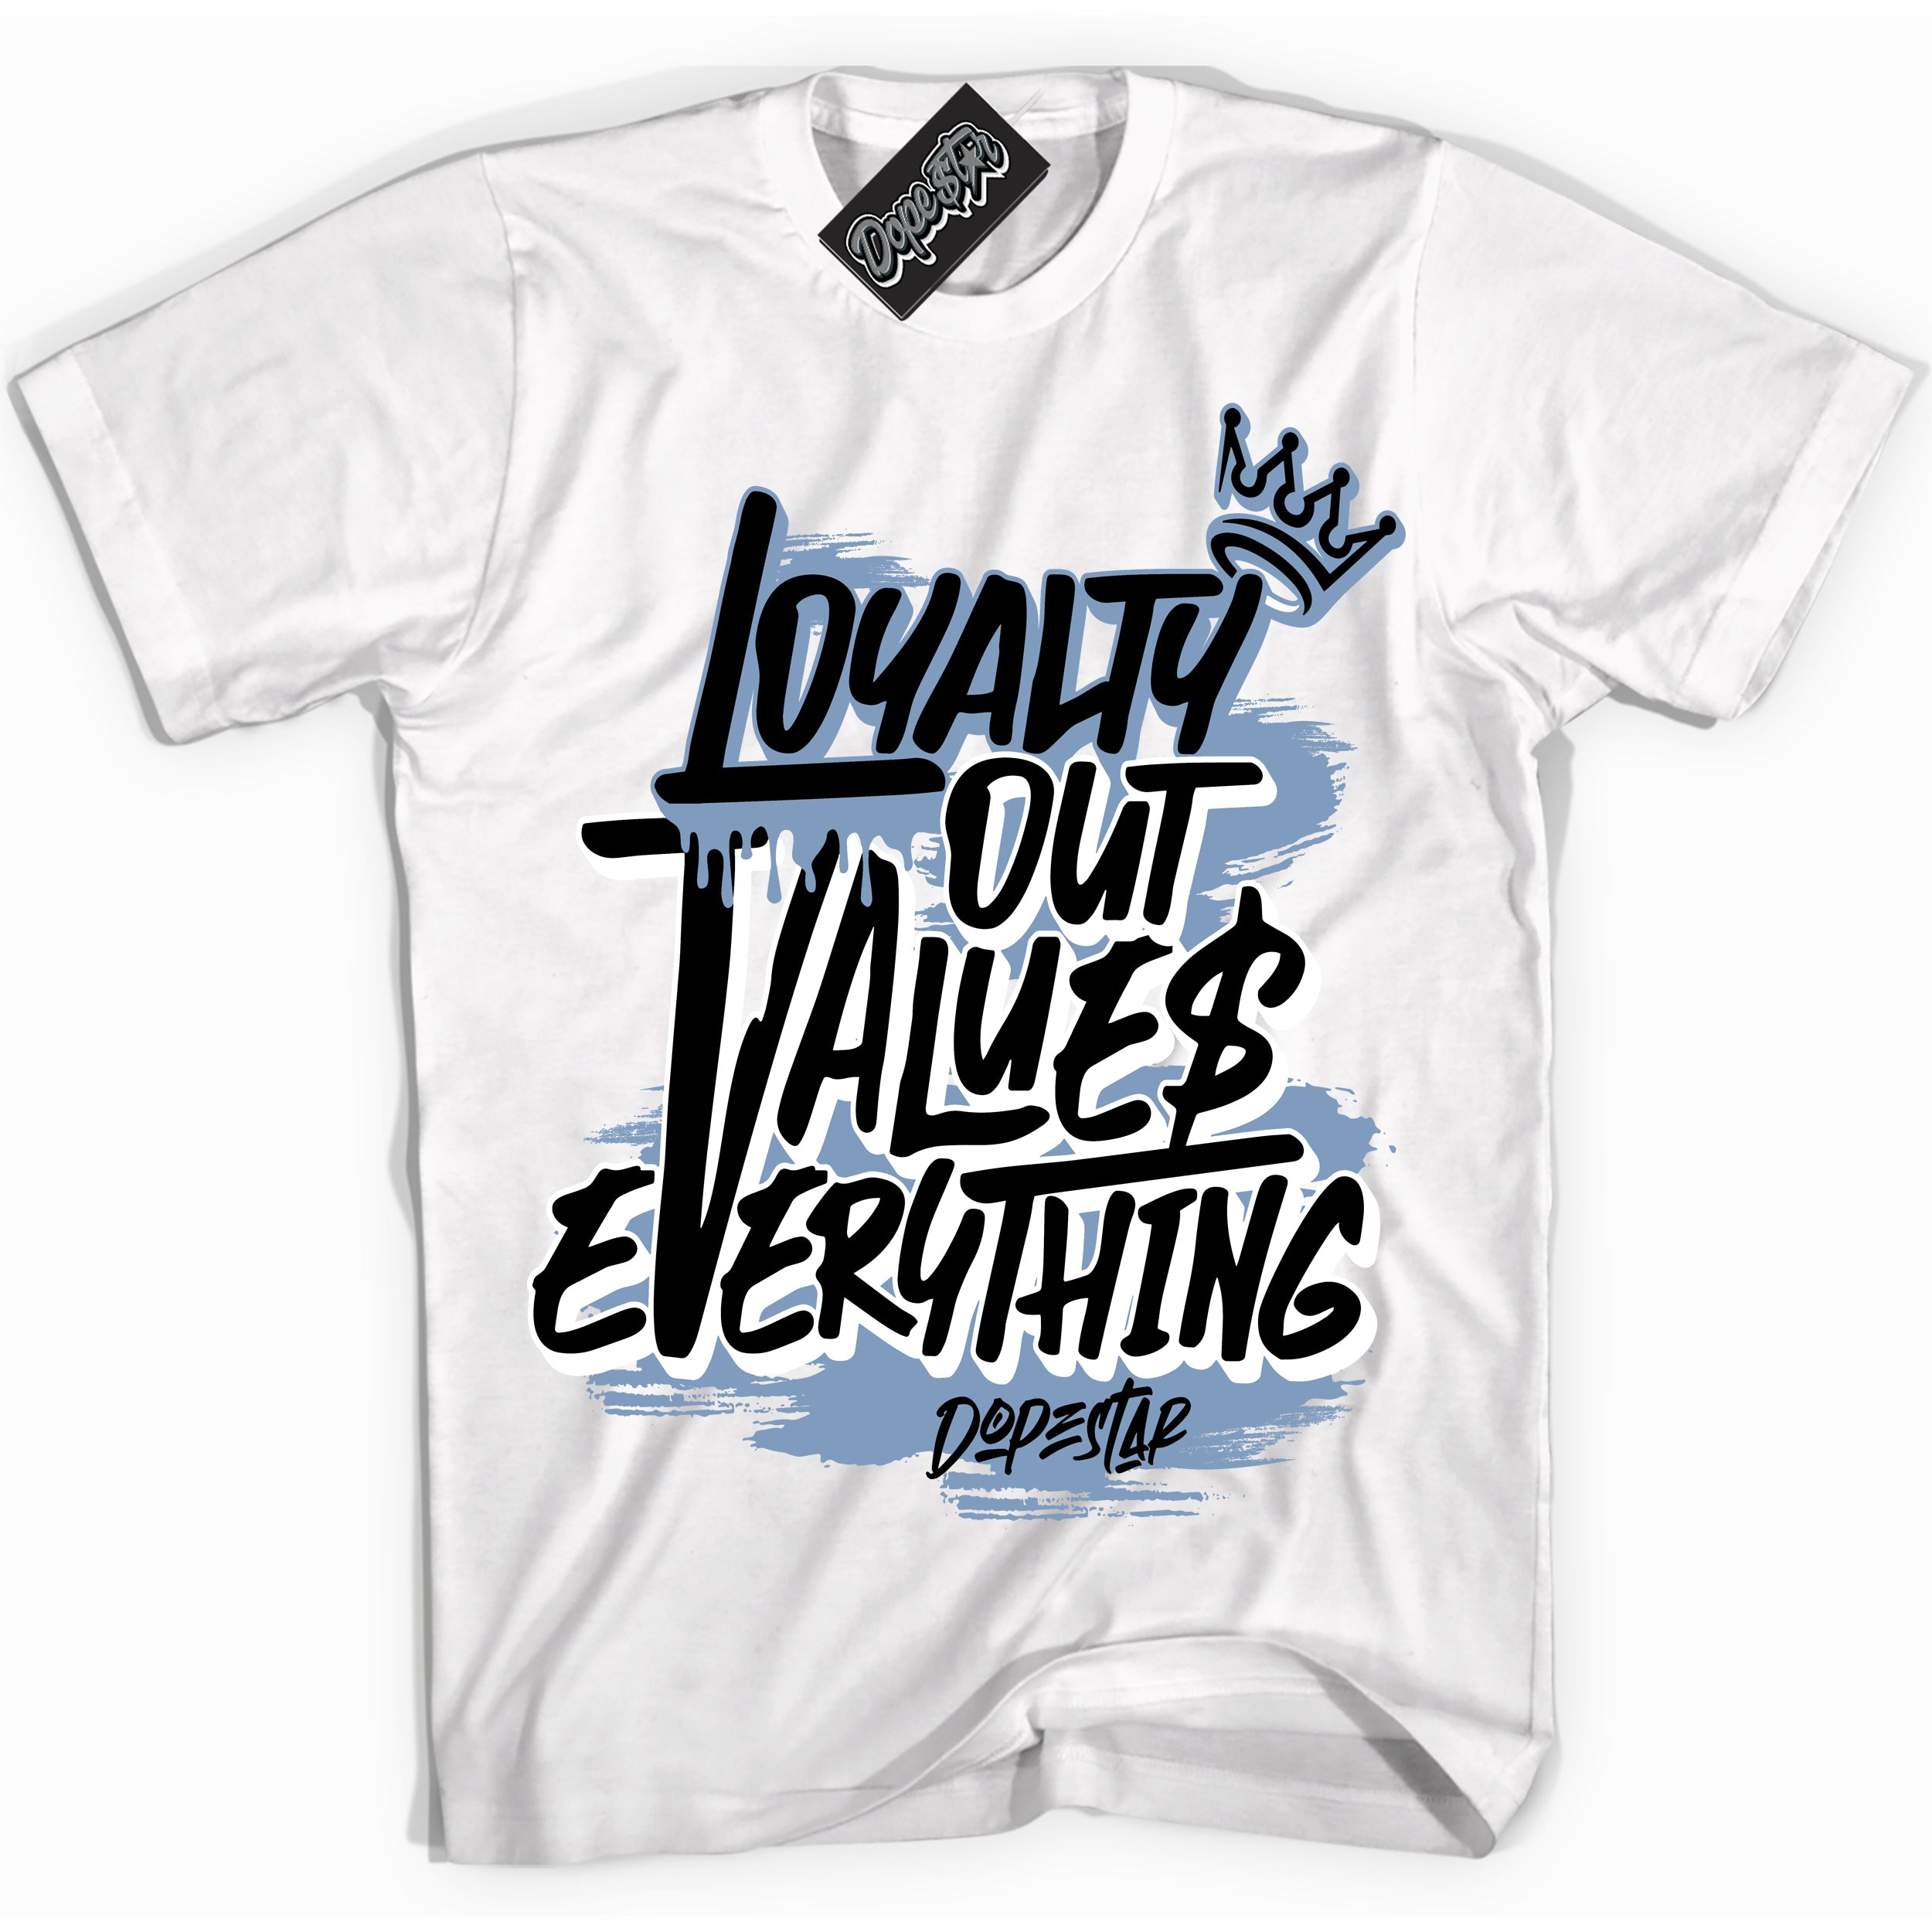 Cool White Shirt with “ Loyalty Out Values Everything” design that perfectly matches SE Space Jam 1s Sneakers.